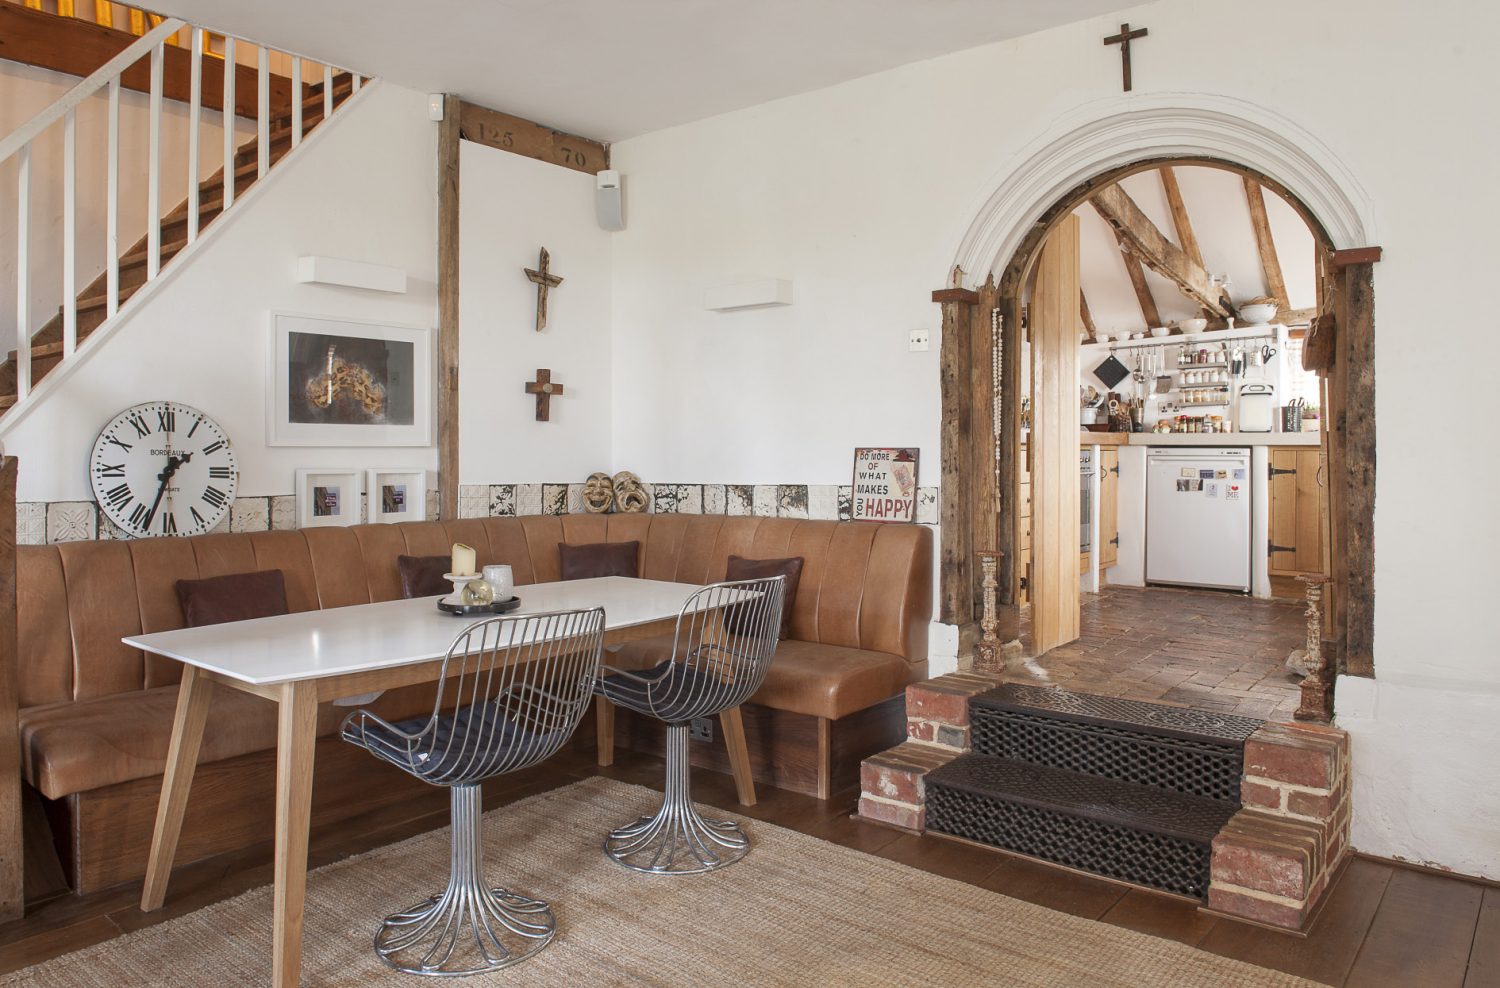 The family/breakfast room divided by a structural beam supported by one of the cast iron pillars that once held up a roof in Tenterden’s Victorian railway station